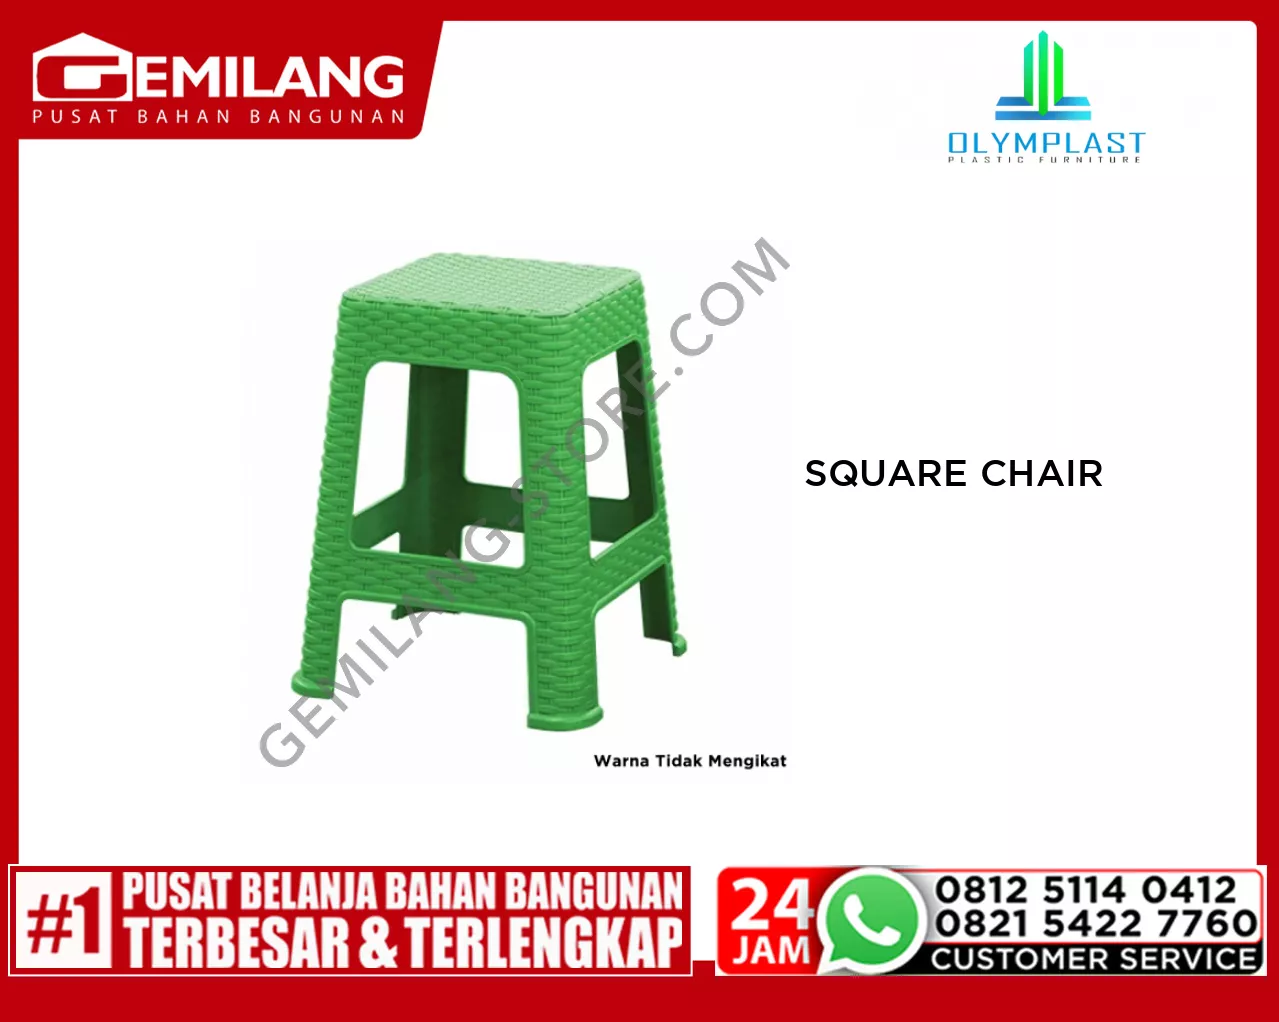 OLYMPLAST SQUARE CHAIR